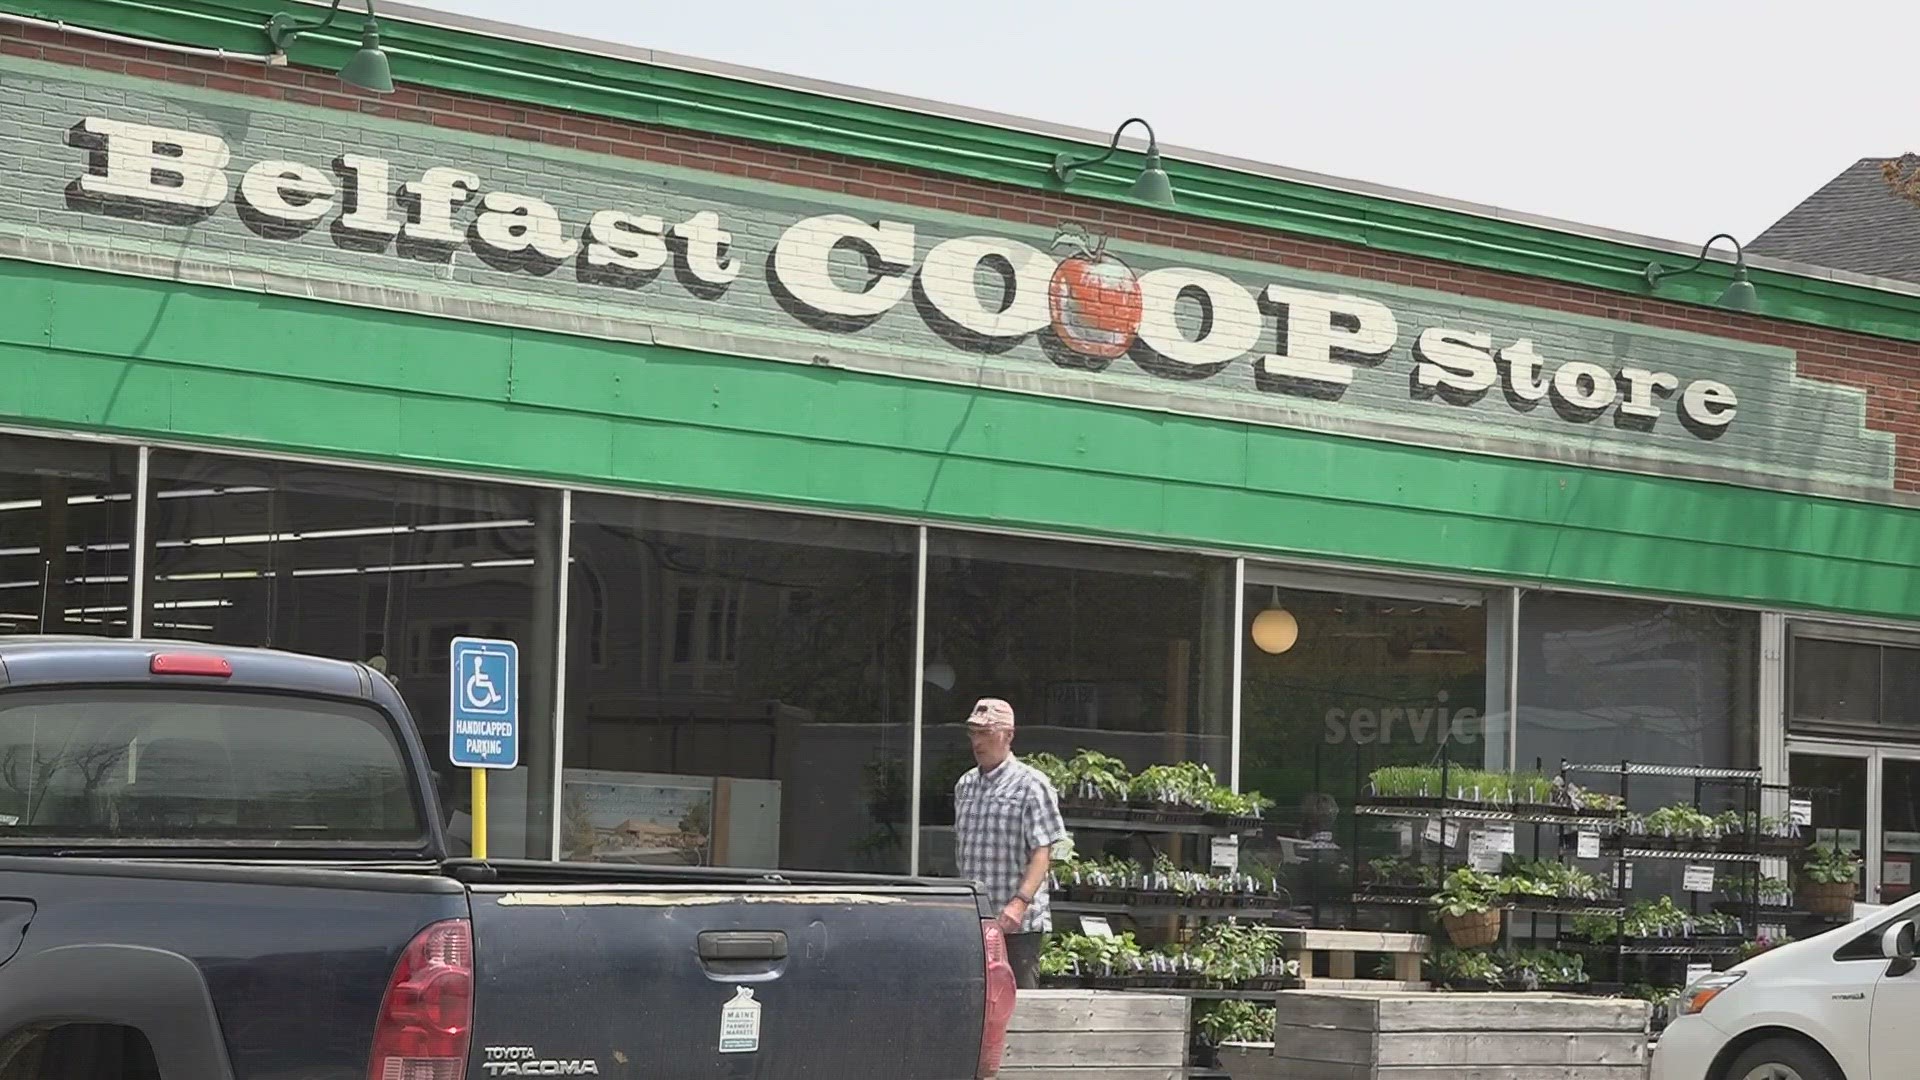 It's been a long time coming for the Belfast Community Co-op store upgrades, and the city is anxious to get the work started.